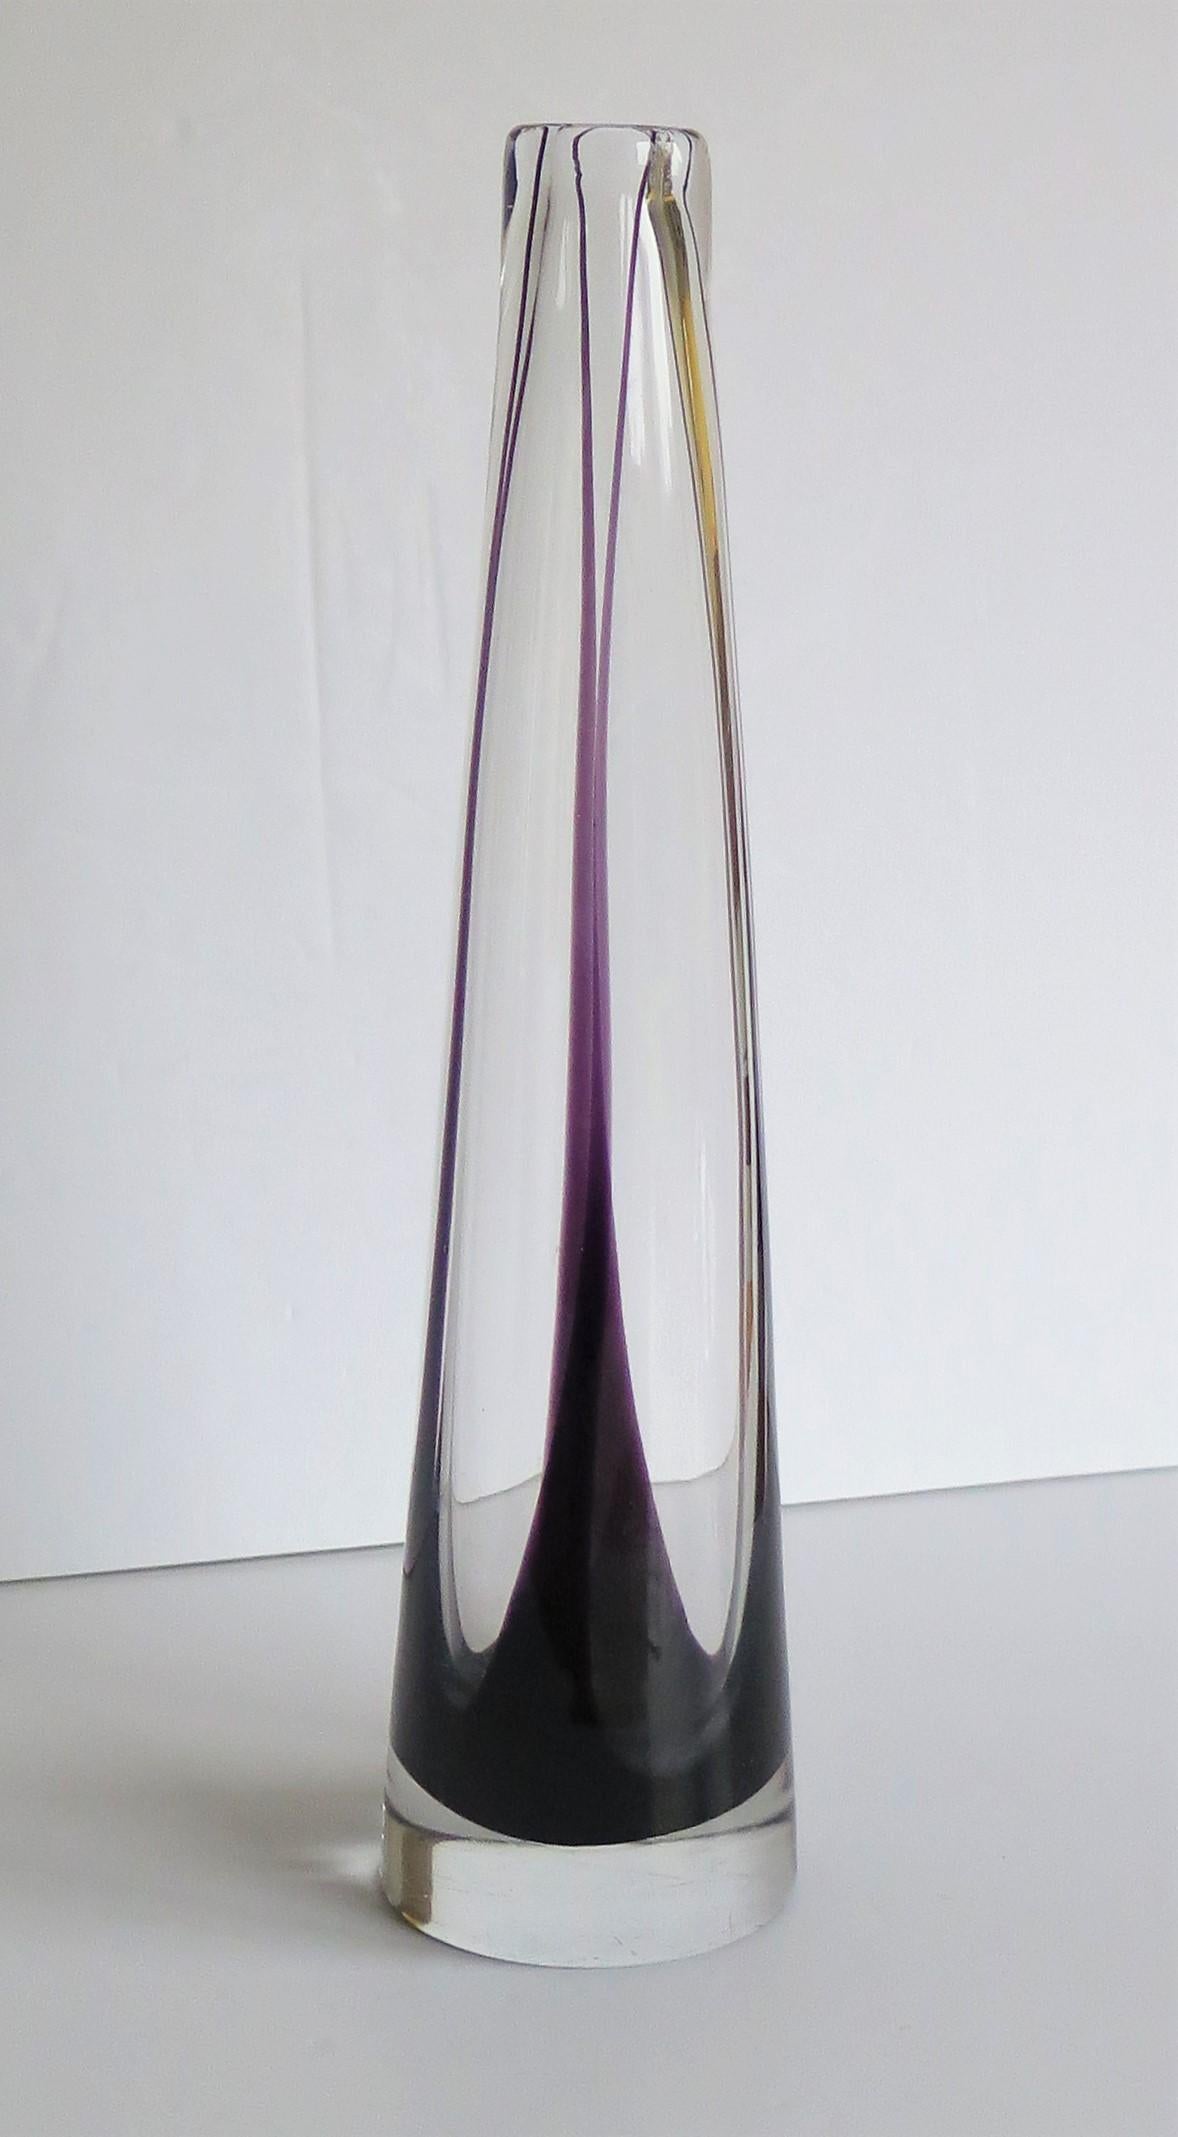 This is a mid-century Swedish Scandinavian Mid Century Modern, tall Art glass Sommerso Vase, attributed to the designer Vicke Lindstrand, for the maker Kosta Glass of Sweden, dating to circa 1960.

Vicke Lindstrand is considered by many to be one of